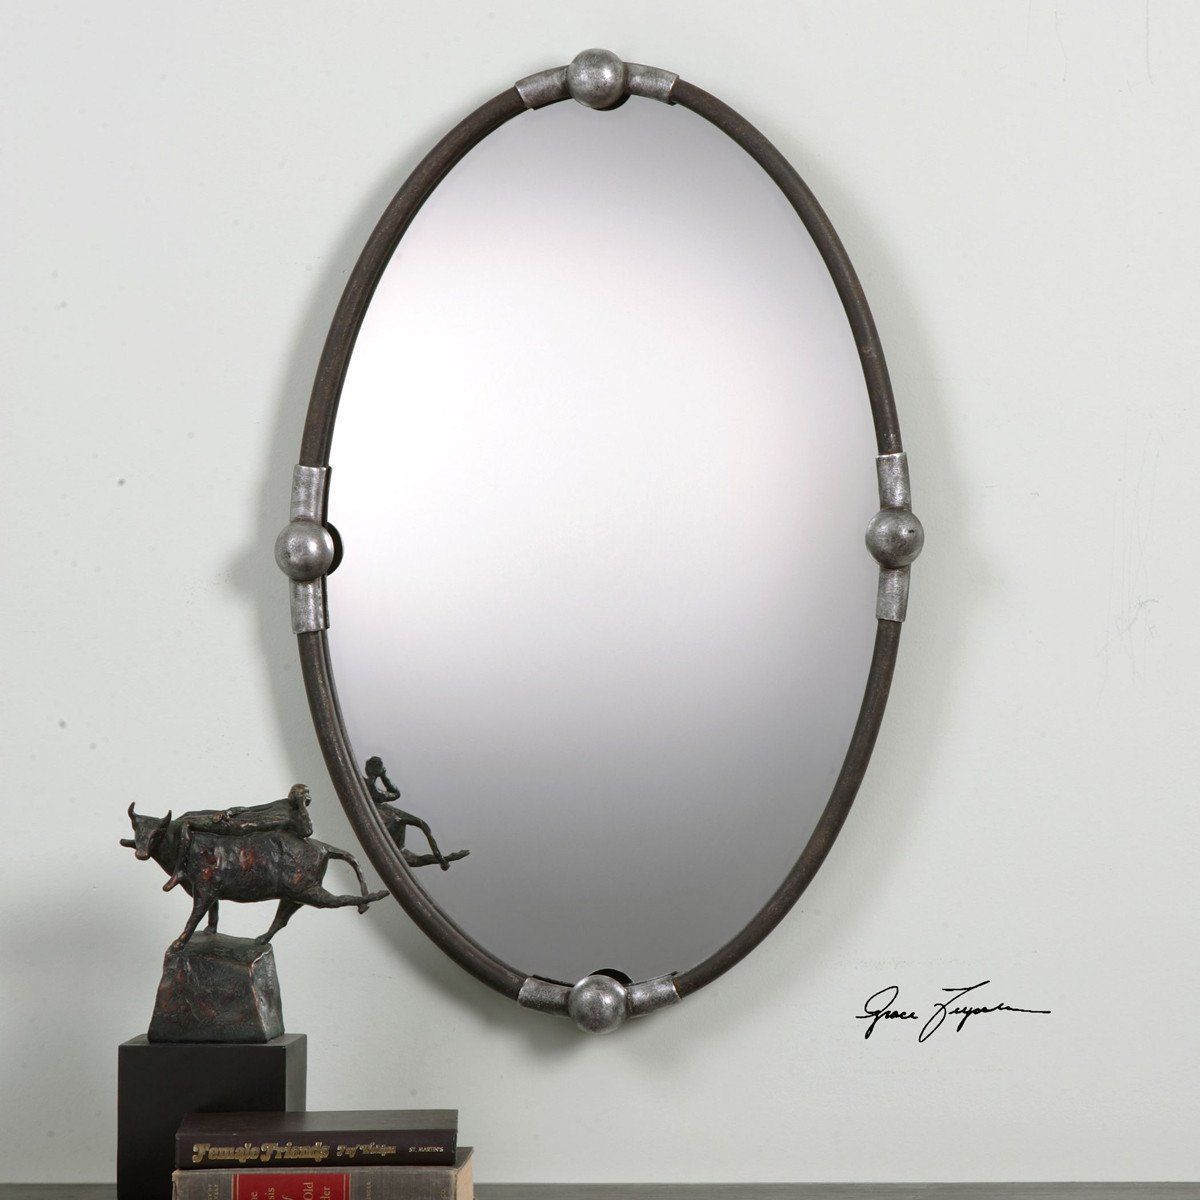 Carrick Black Oval Mirror | Oval Mirror, Oval Wall Mirror, Mirror Wall Inside Black Oval Cut Wall Mirrors (View 5 of 15)